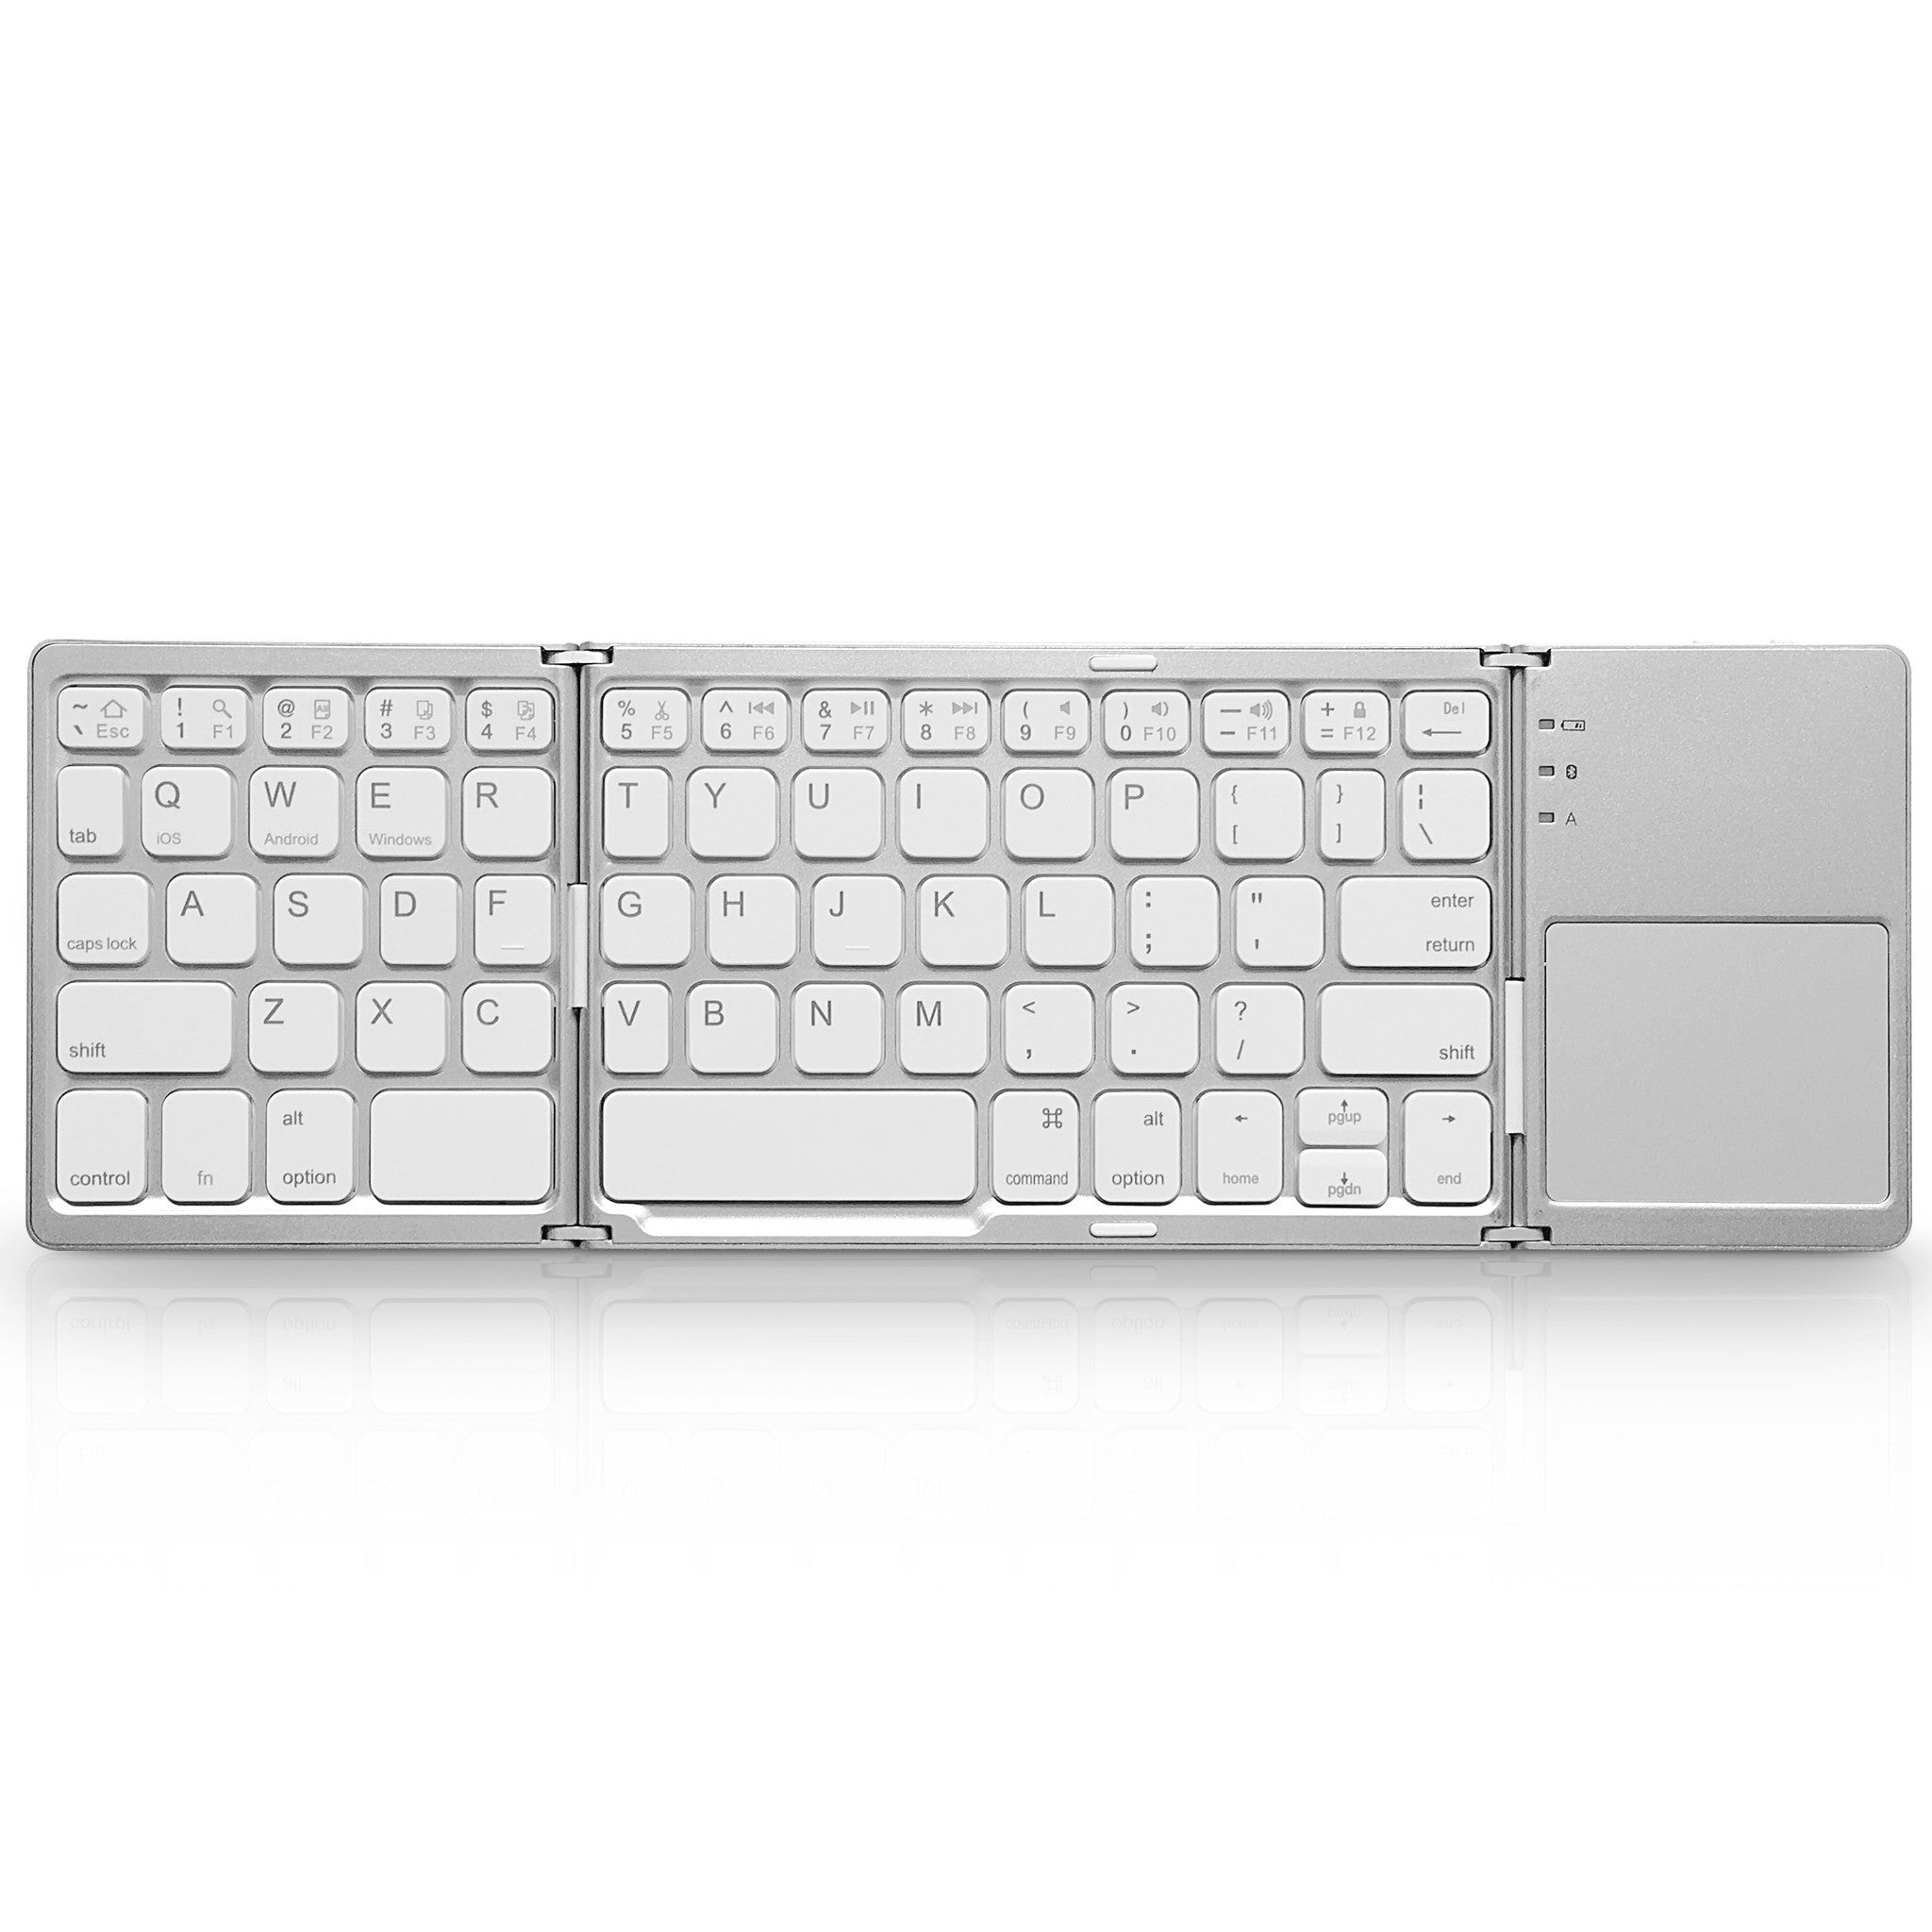 FOLDBOARD TOUCH: FOLDING KEYBOARD WITH TOUCHPAD (SILVER)